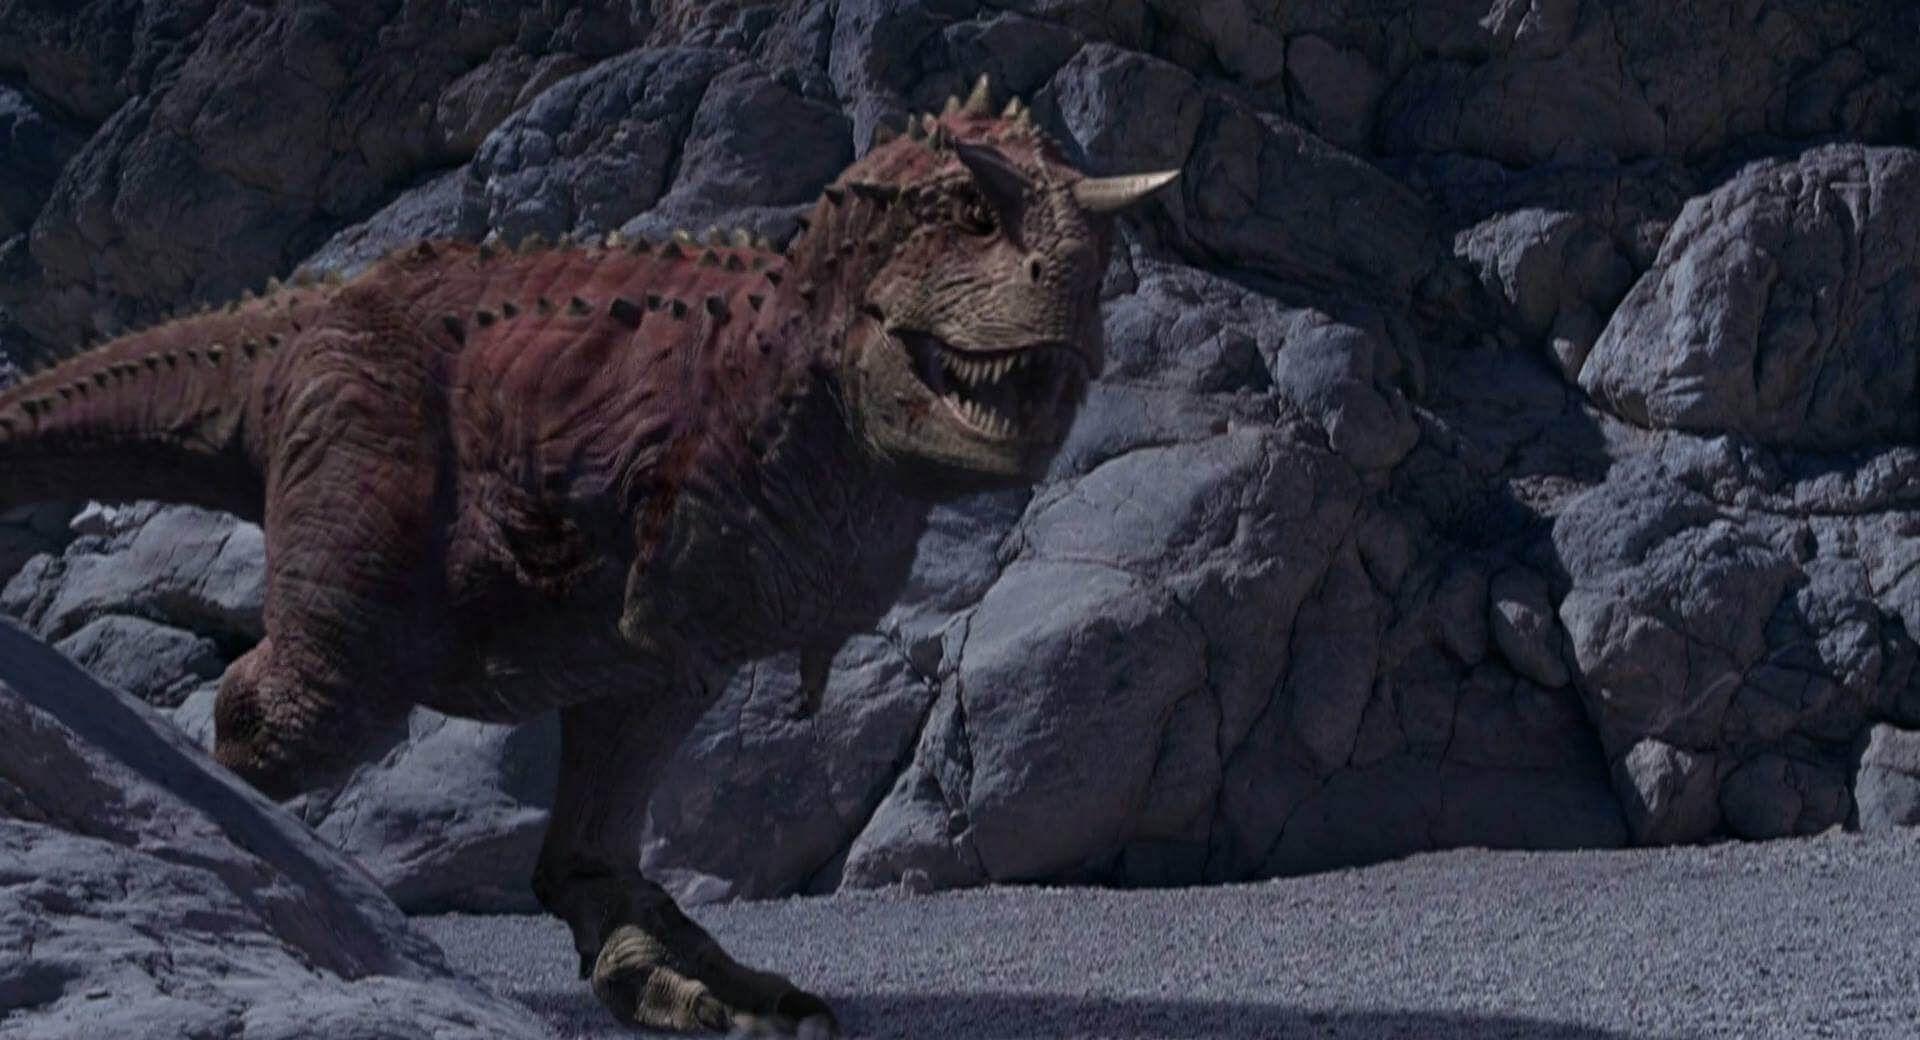 A Carnotaurus as it appeared in the film (Image via Disney)